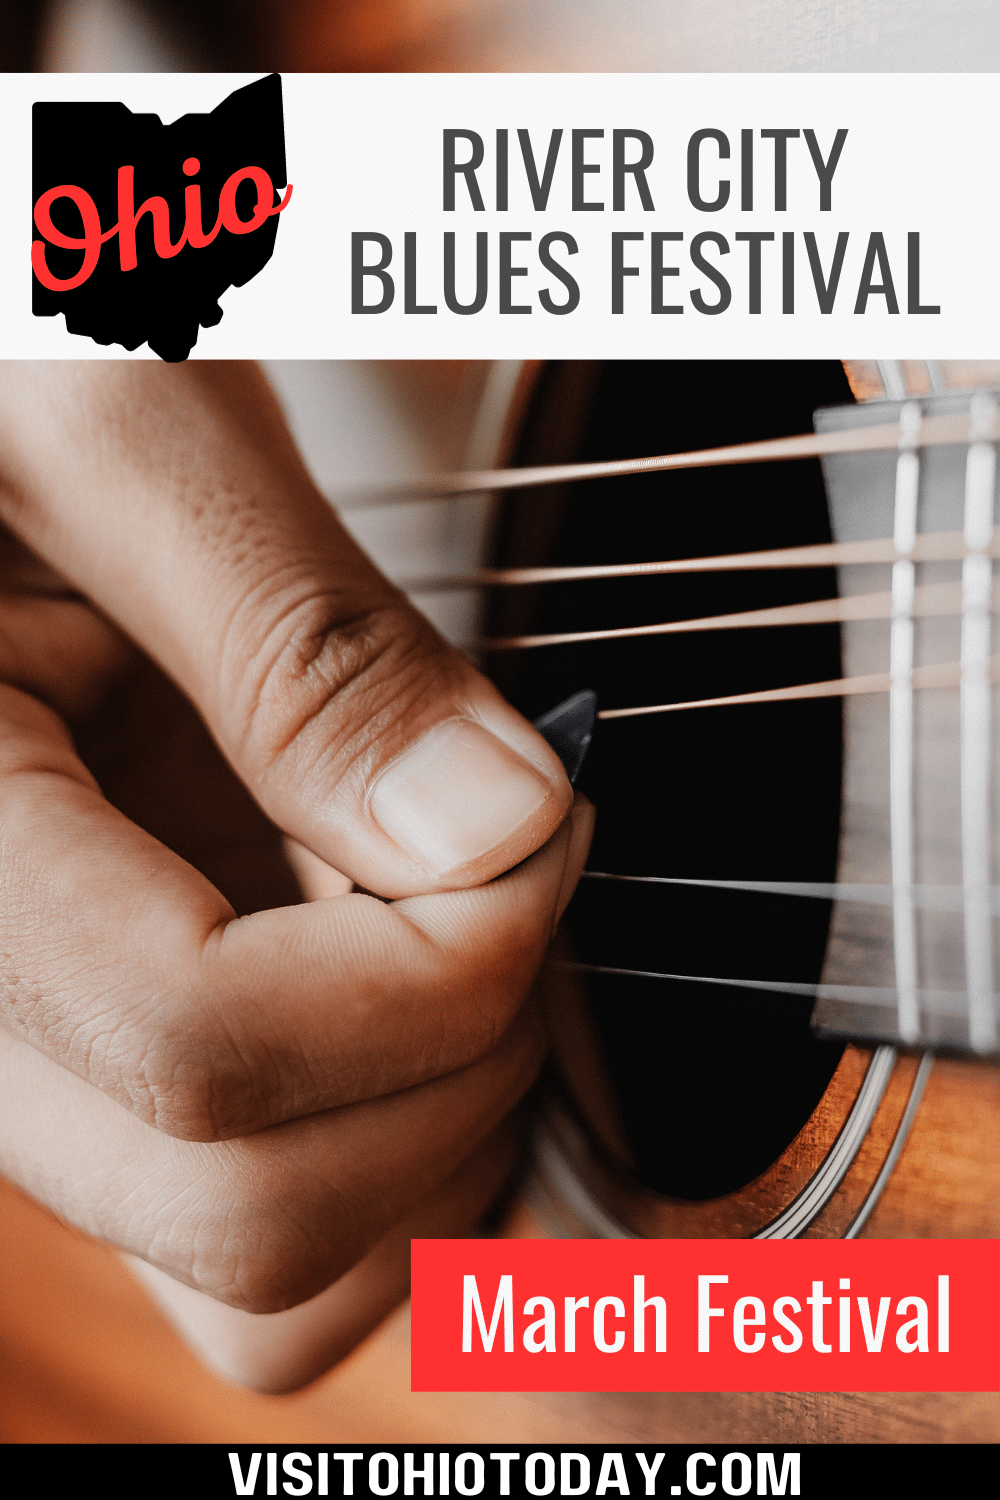 The 31st River City Blues Festival is held in mid-March in Marietta, Ohio. The event showcases music and artists of the genre.